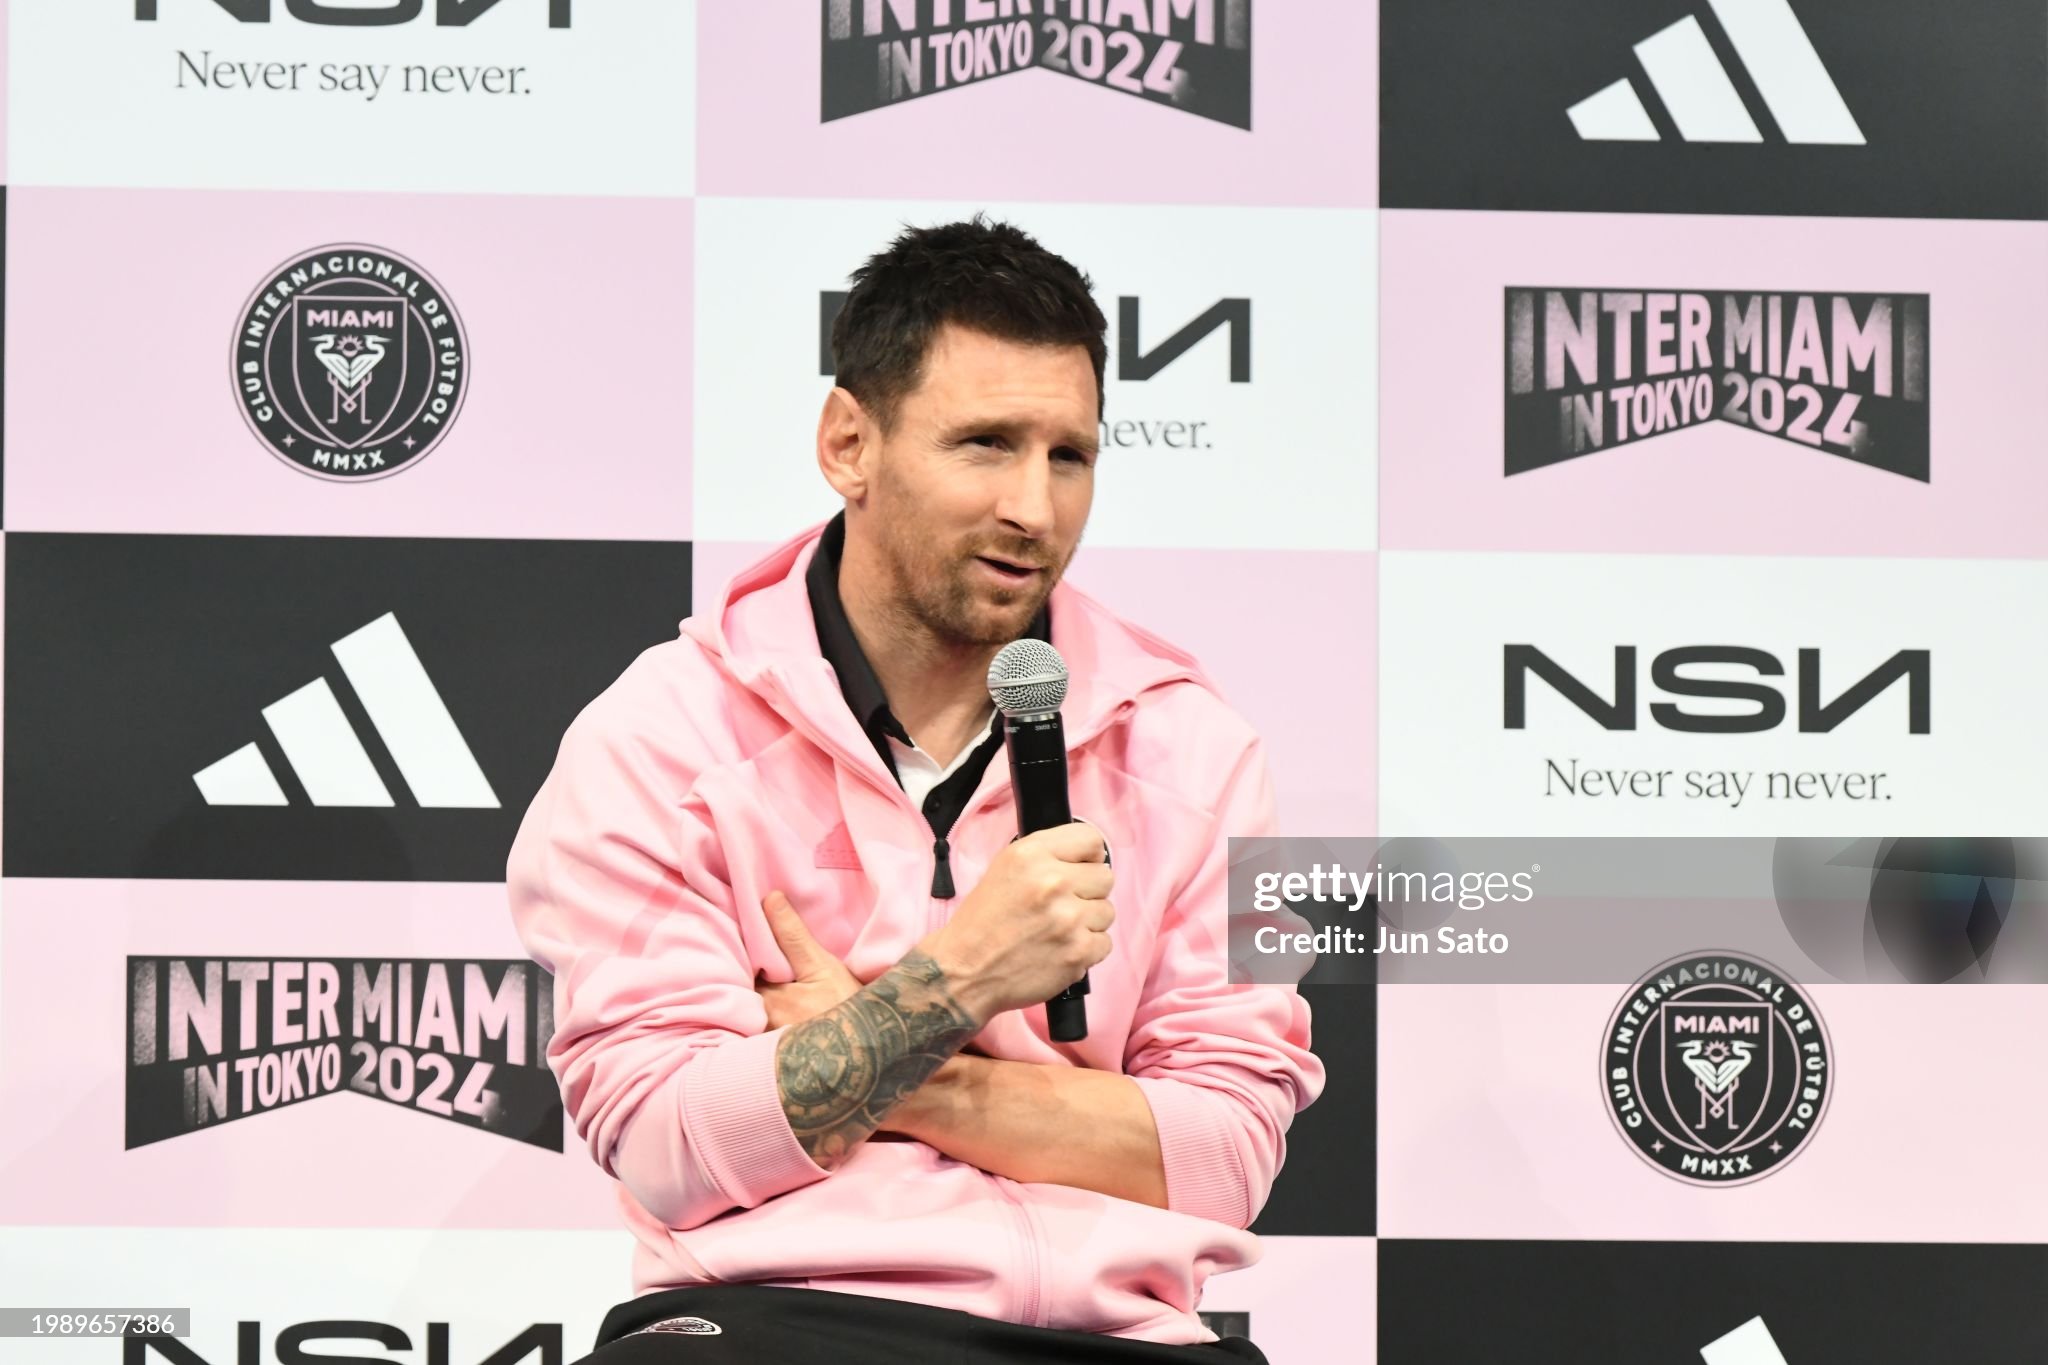 Messi understands the anger of disappointed fans and offers apologies